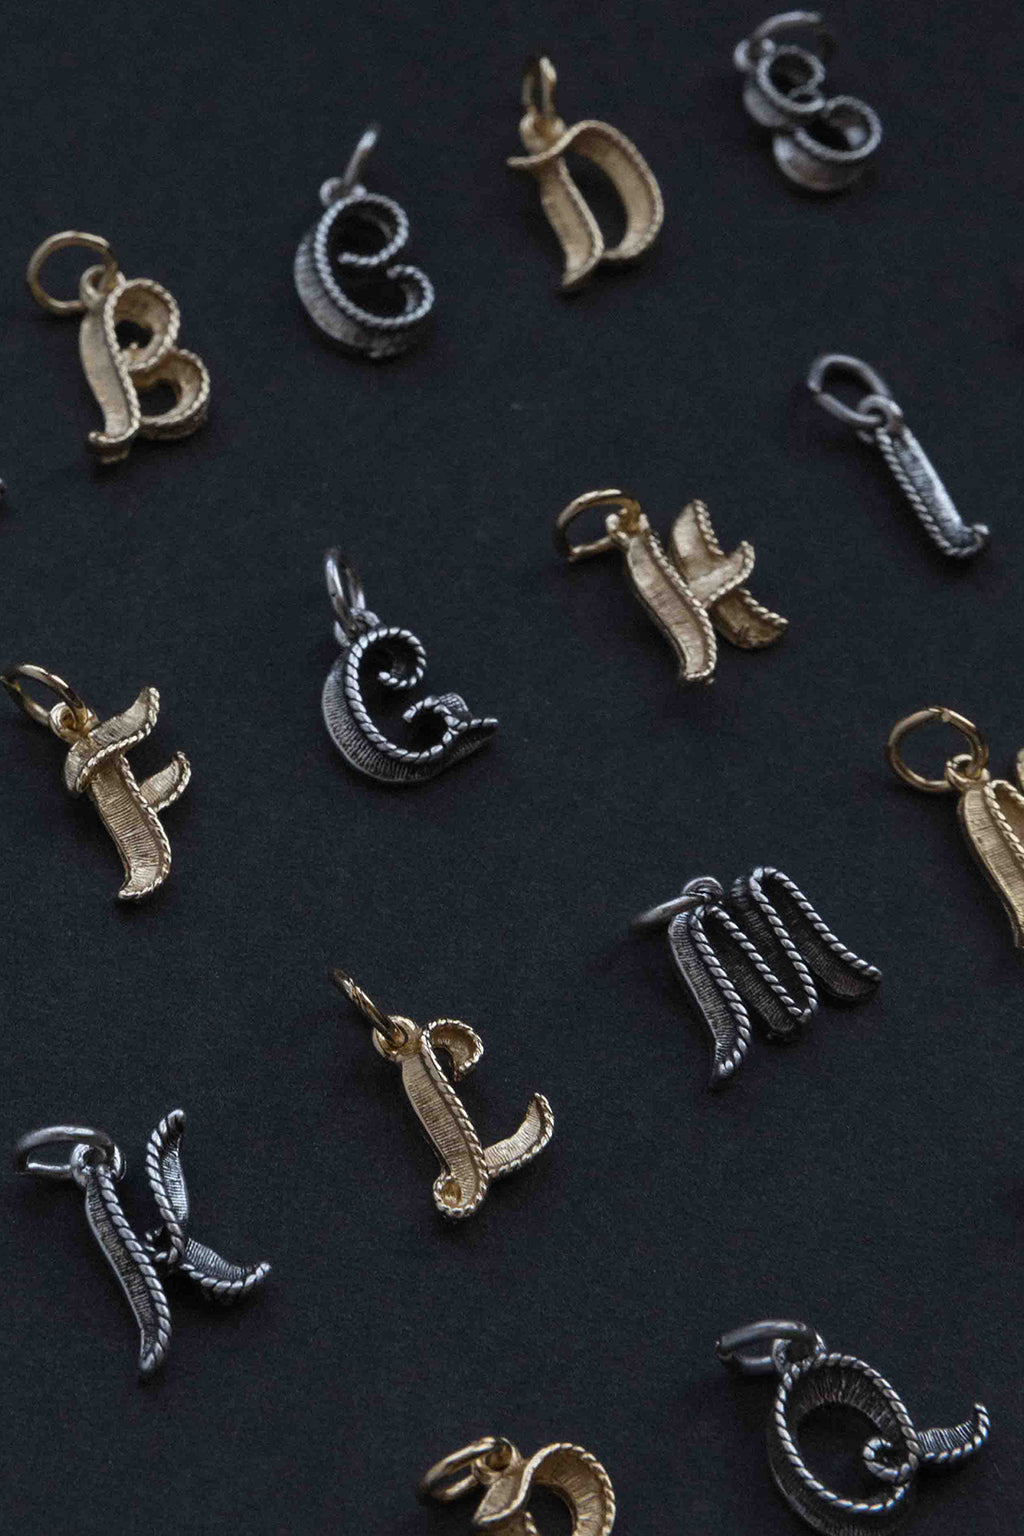 Letter charms - Minitials